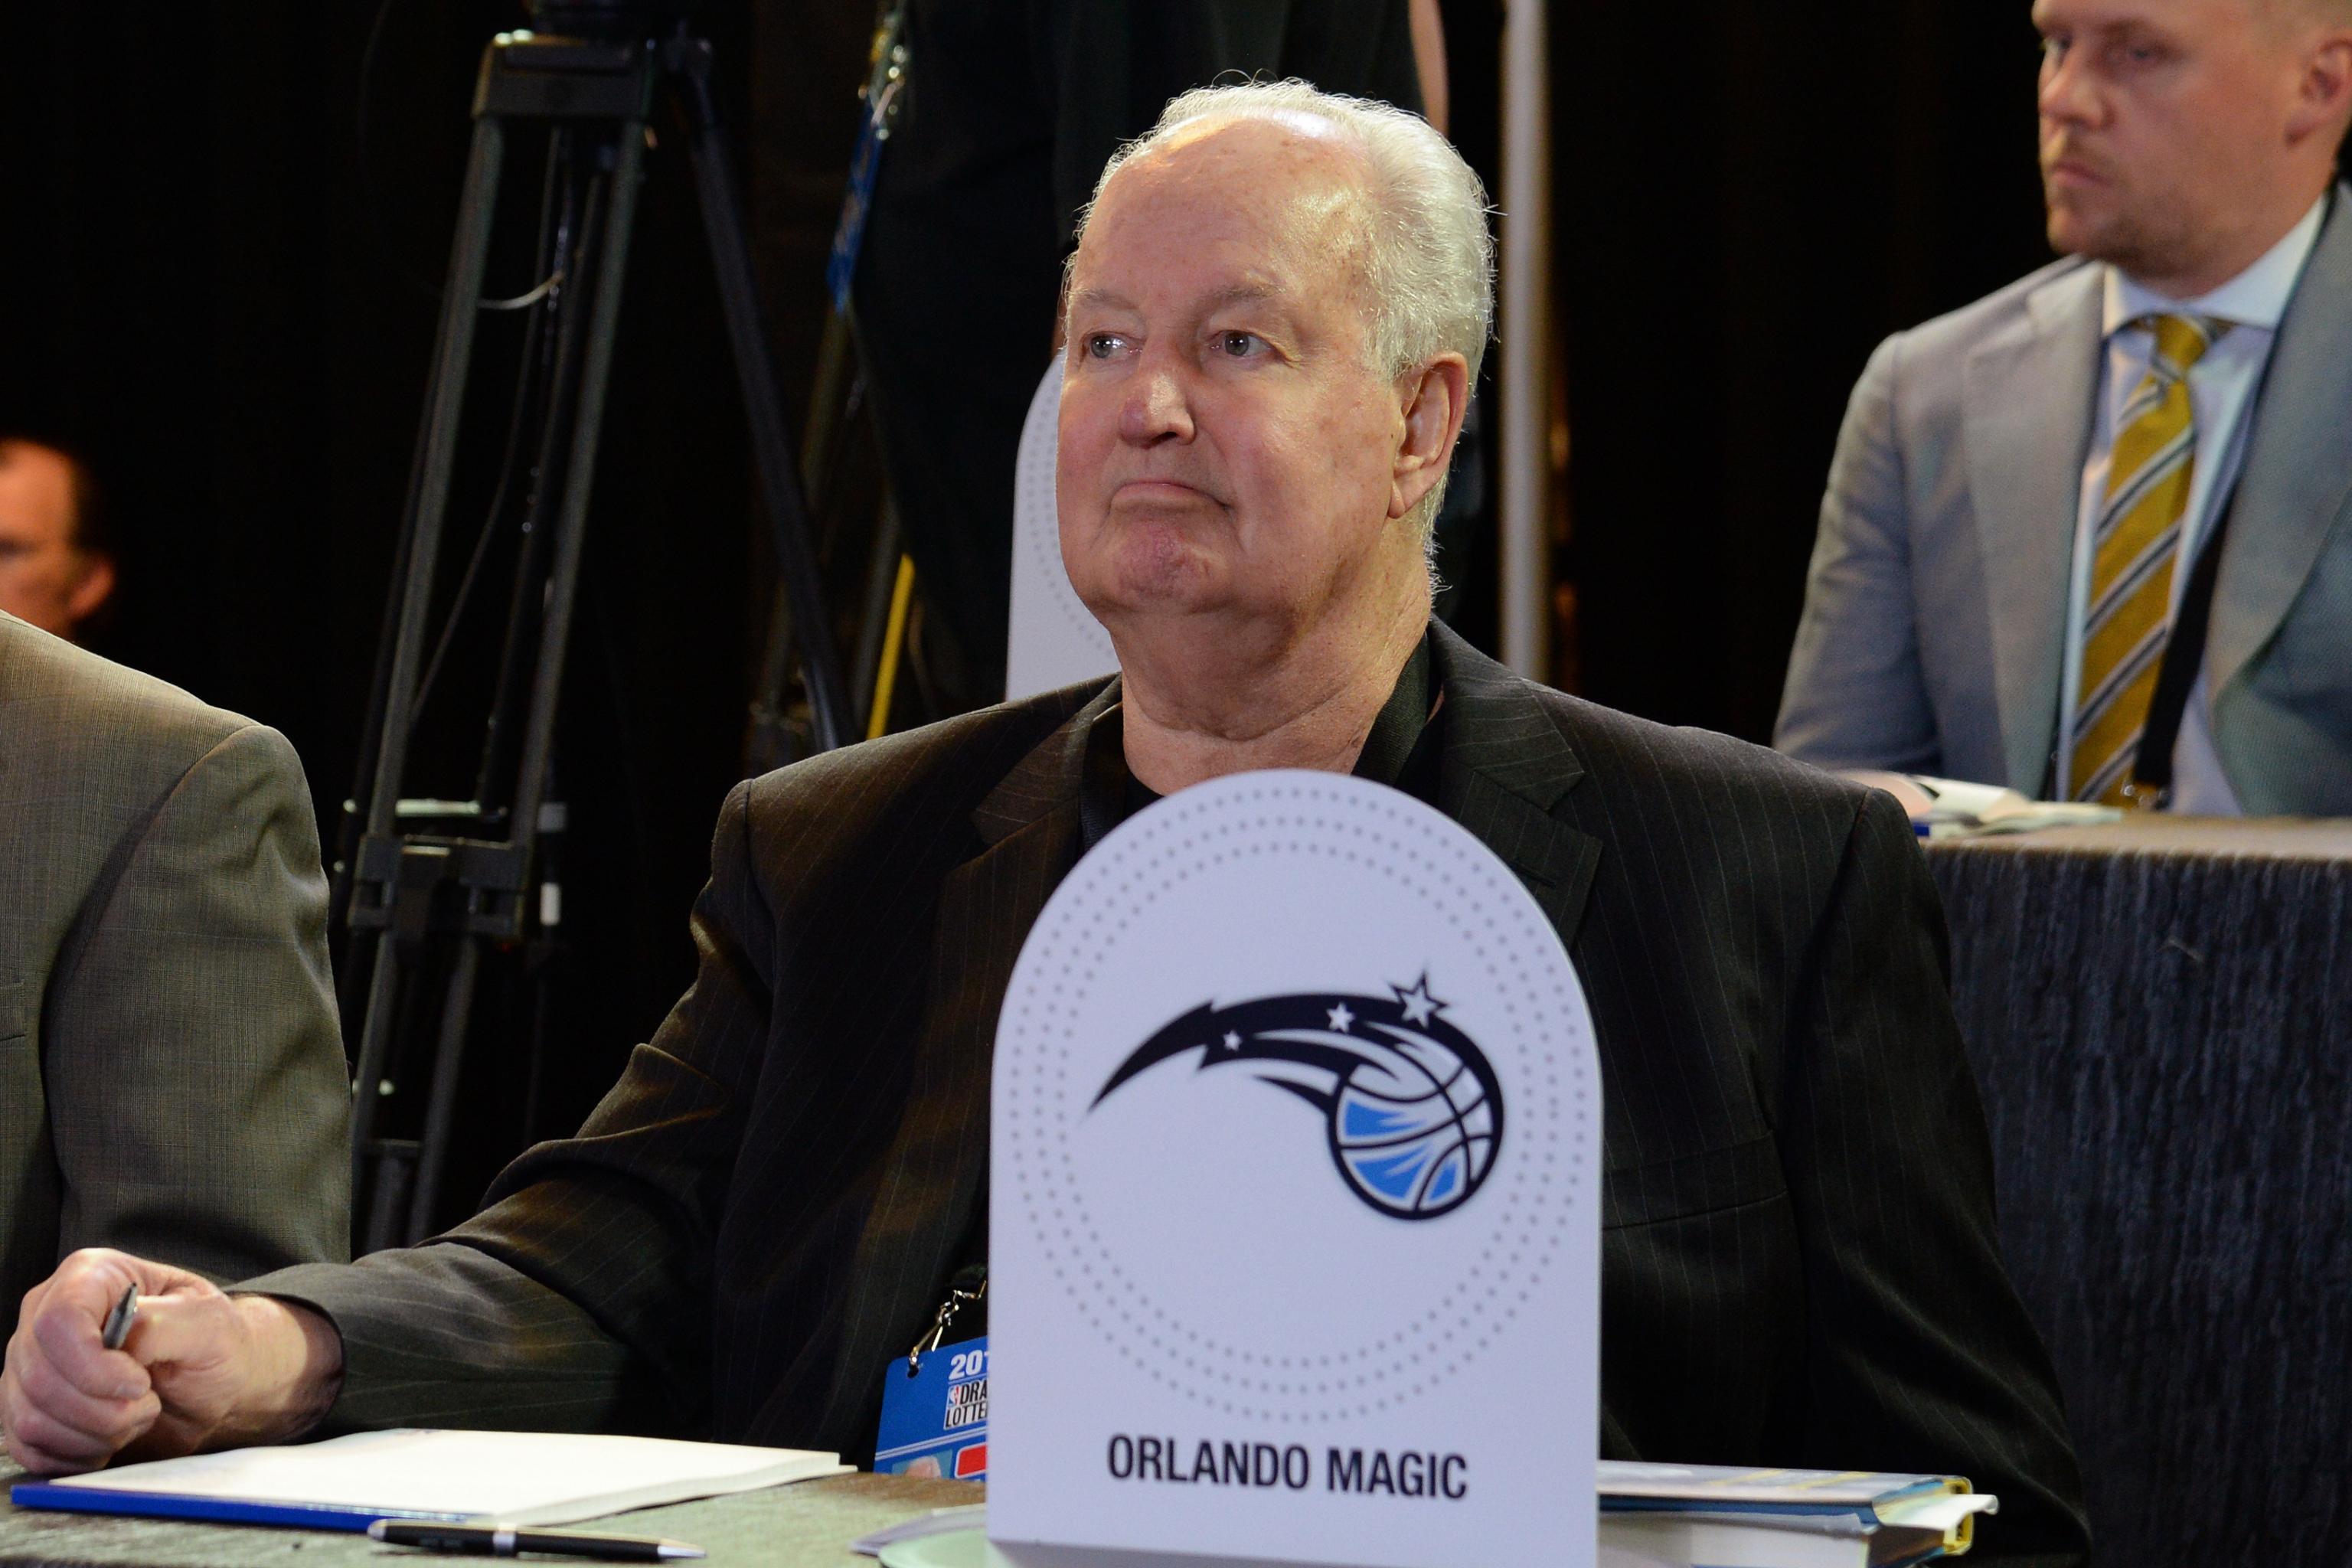 Orlando Magic co-founder Pat Williams is hoping to have an MLB